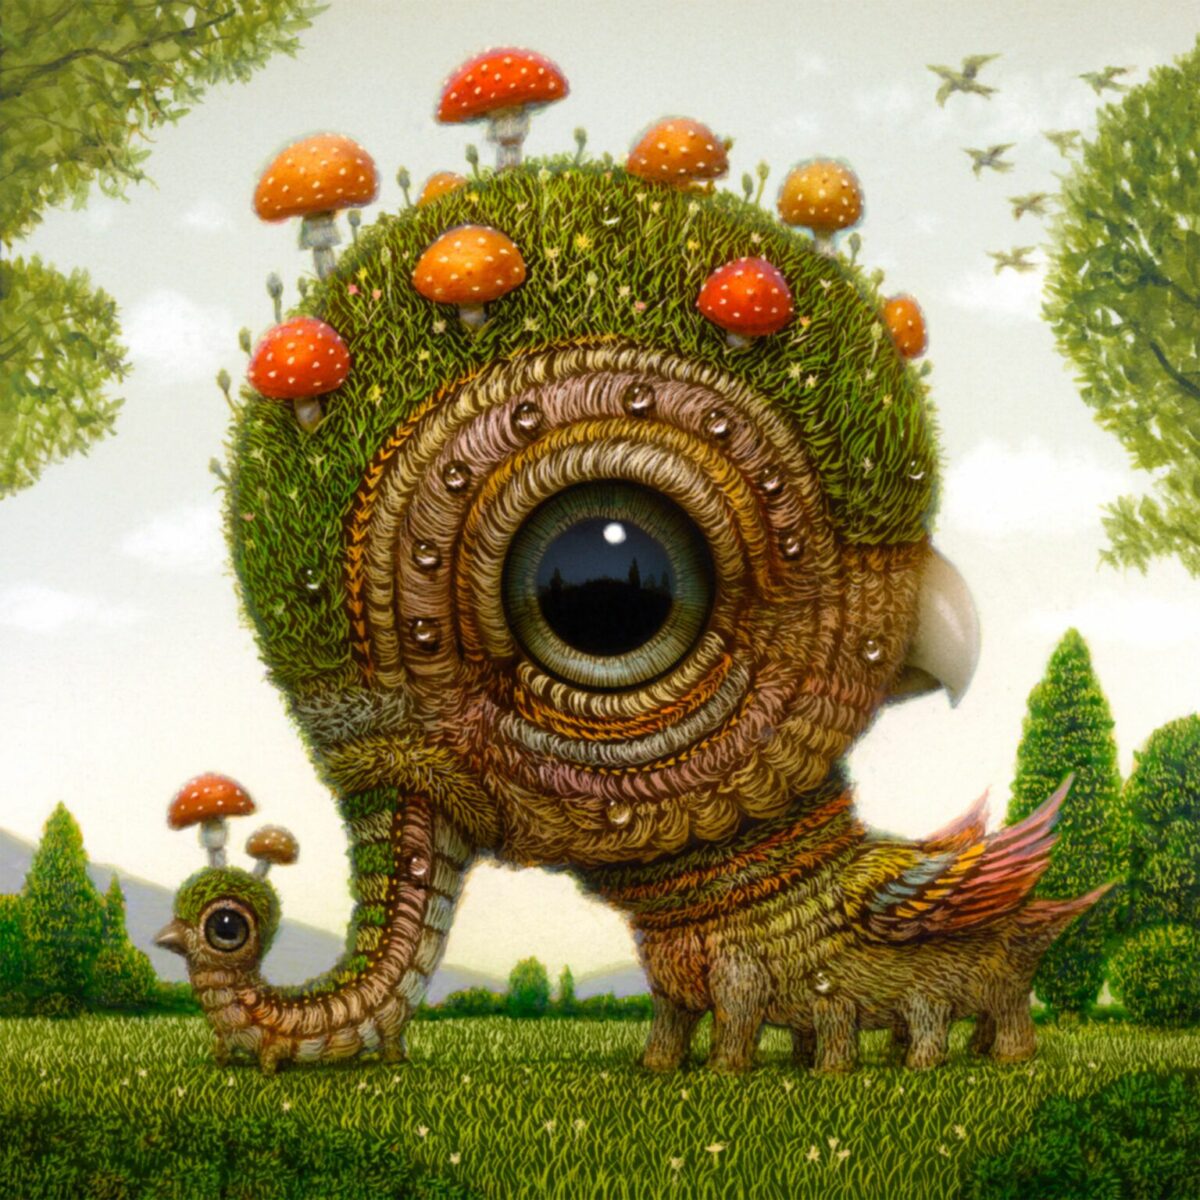 Quirky Fantastical Creatures With Oversized Eyes By Haoto Nattori 5